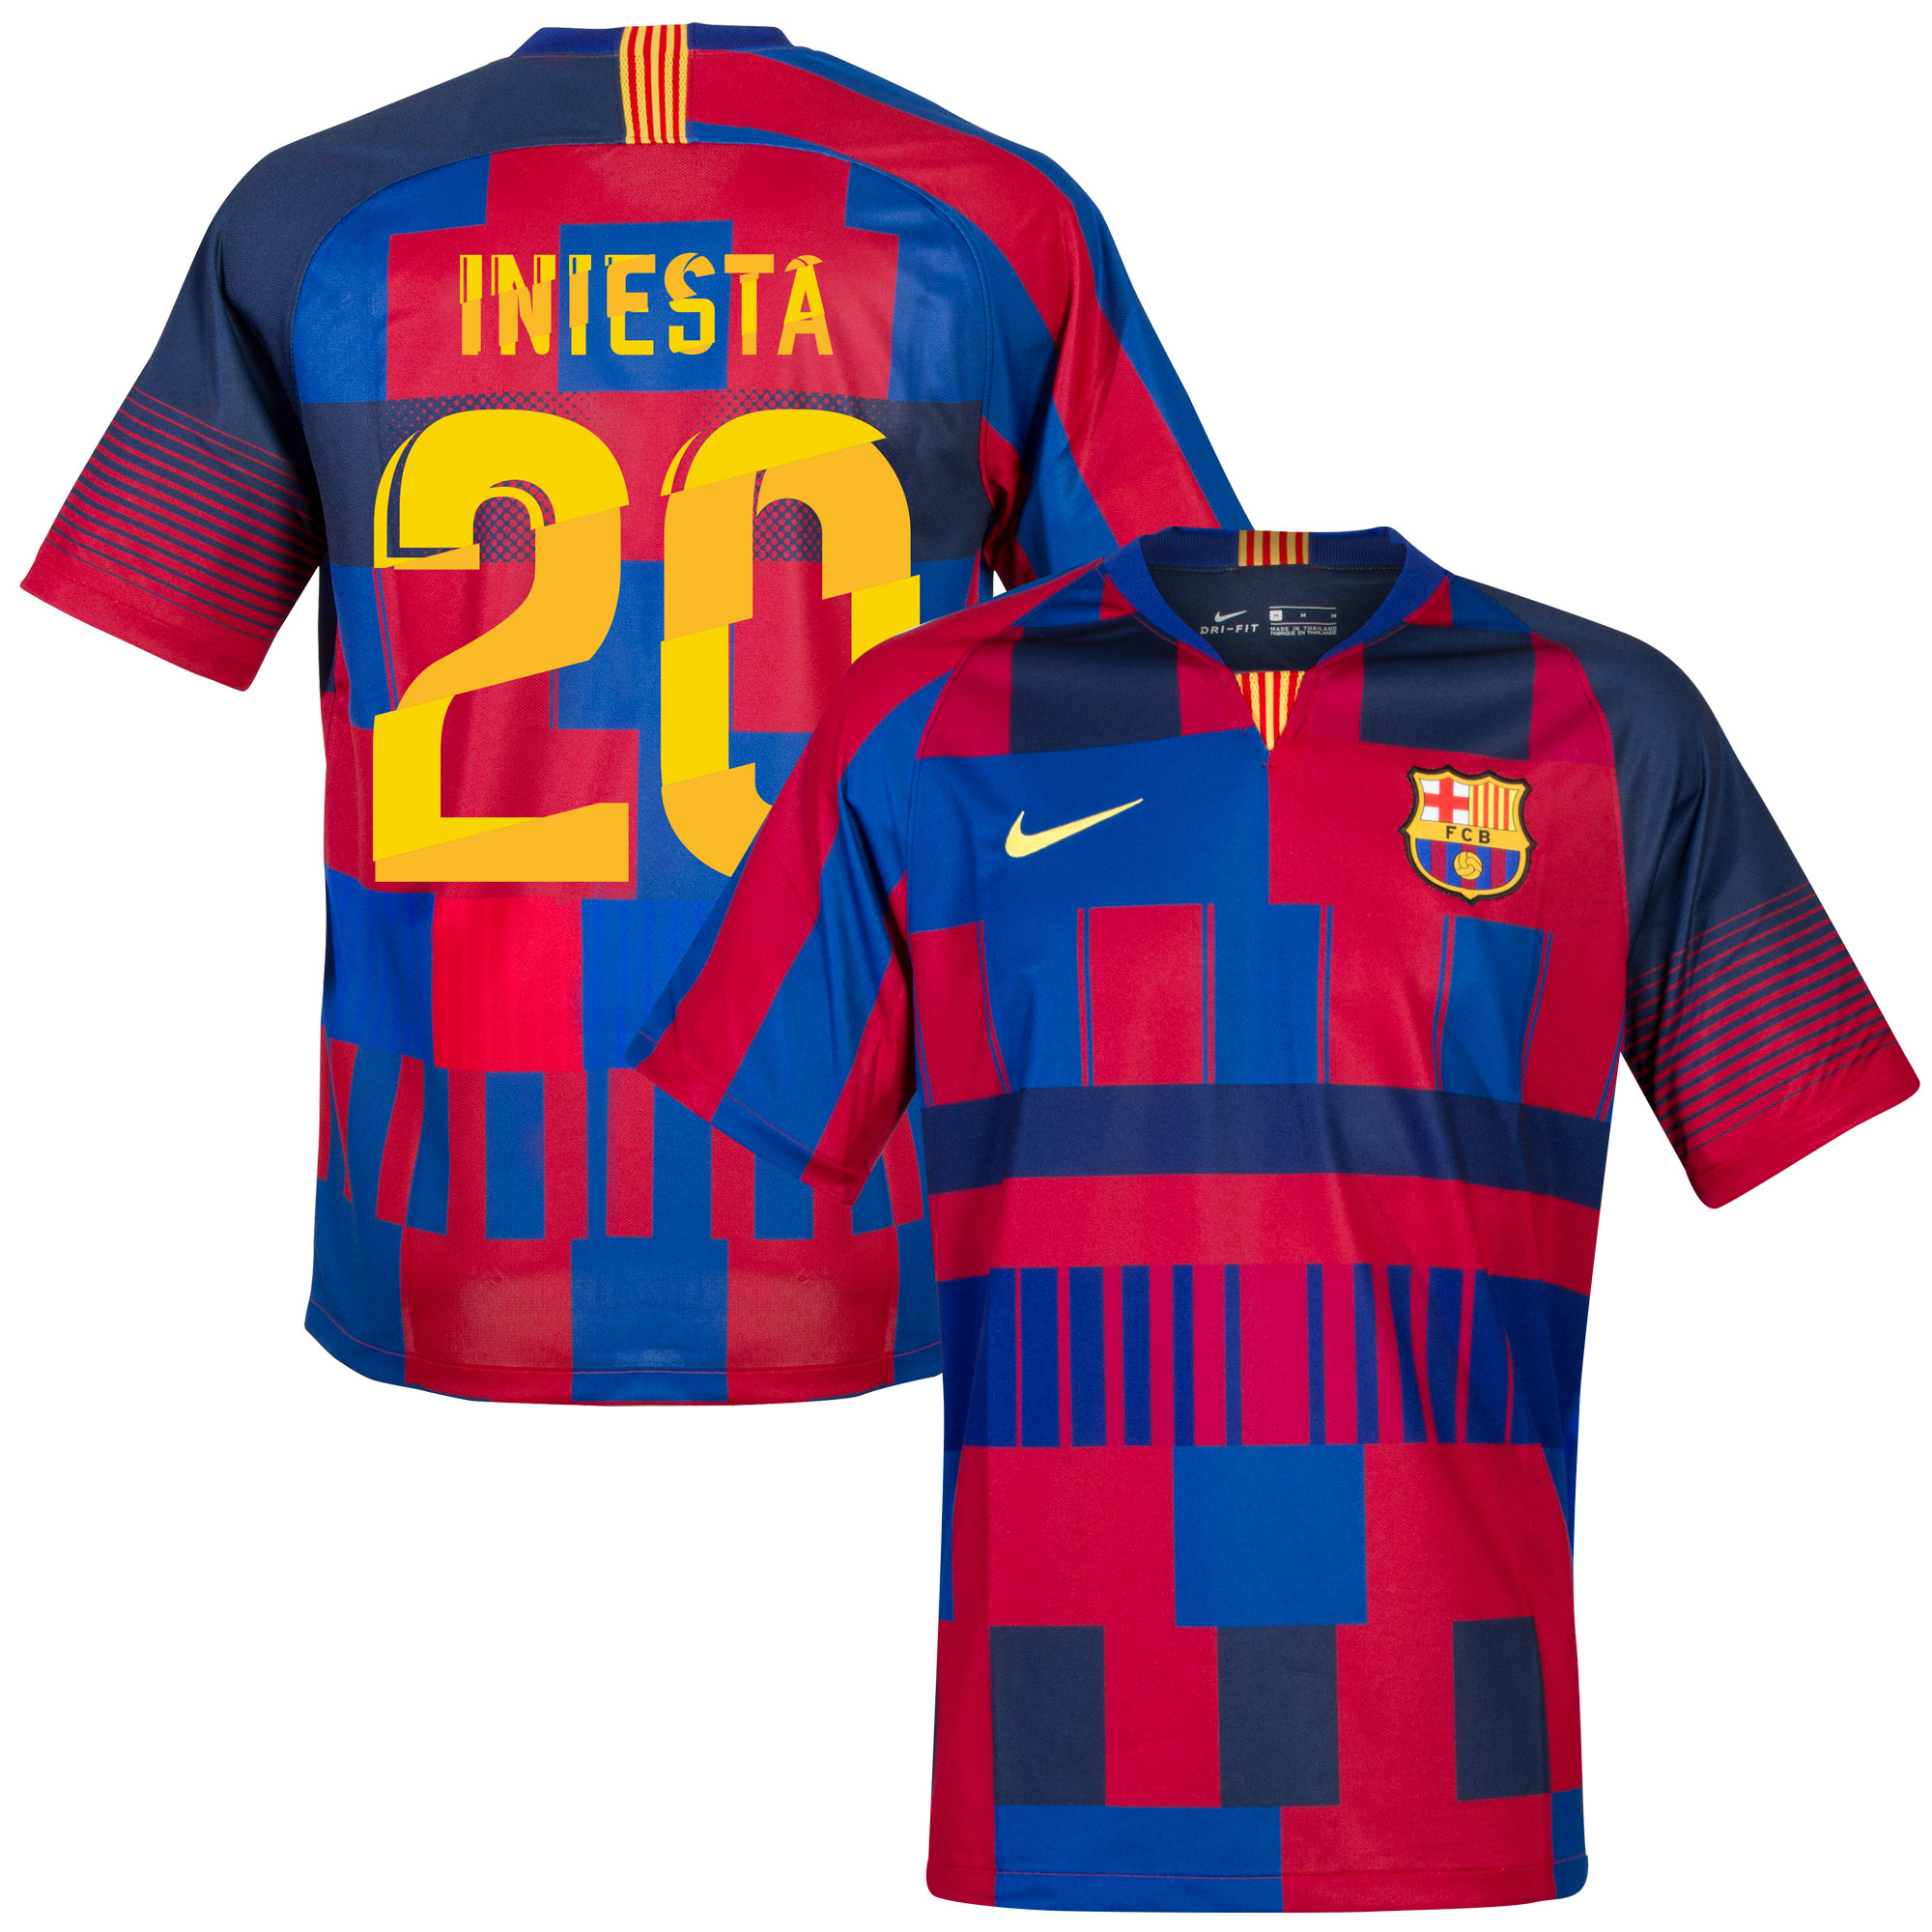 Barcelona x Nike 20th Anniversary Voetbalshirt + Iniesta 20 (Special Edition Fan Style Printing)